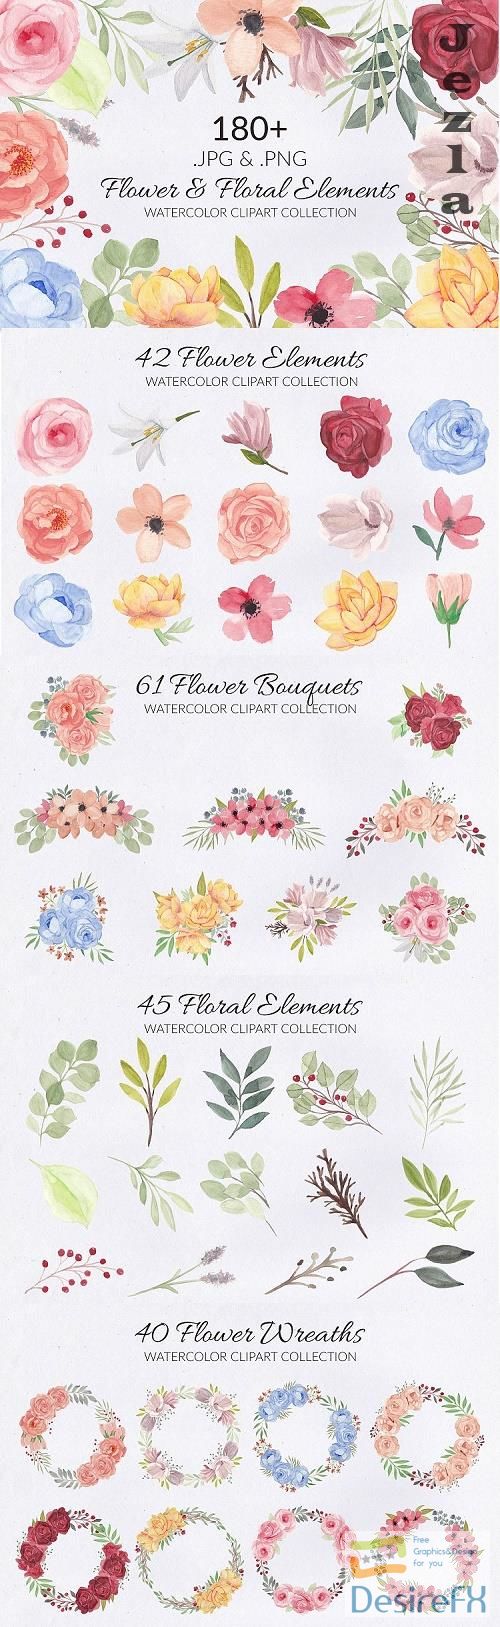 188 Flower and Floral Watercolor Illustration Clip Art - 524294